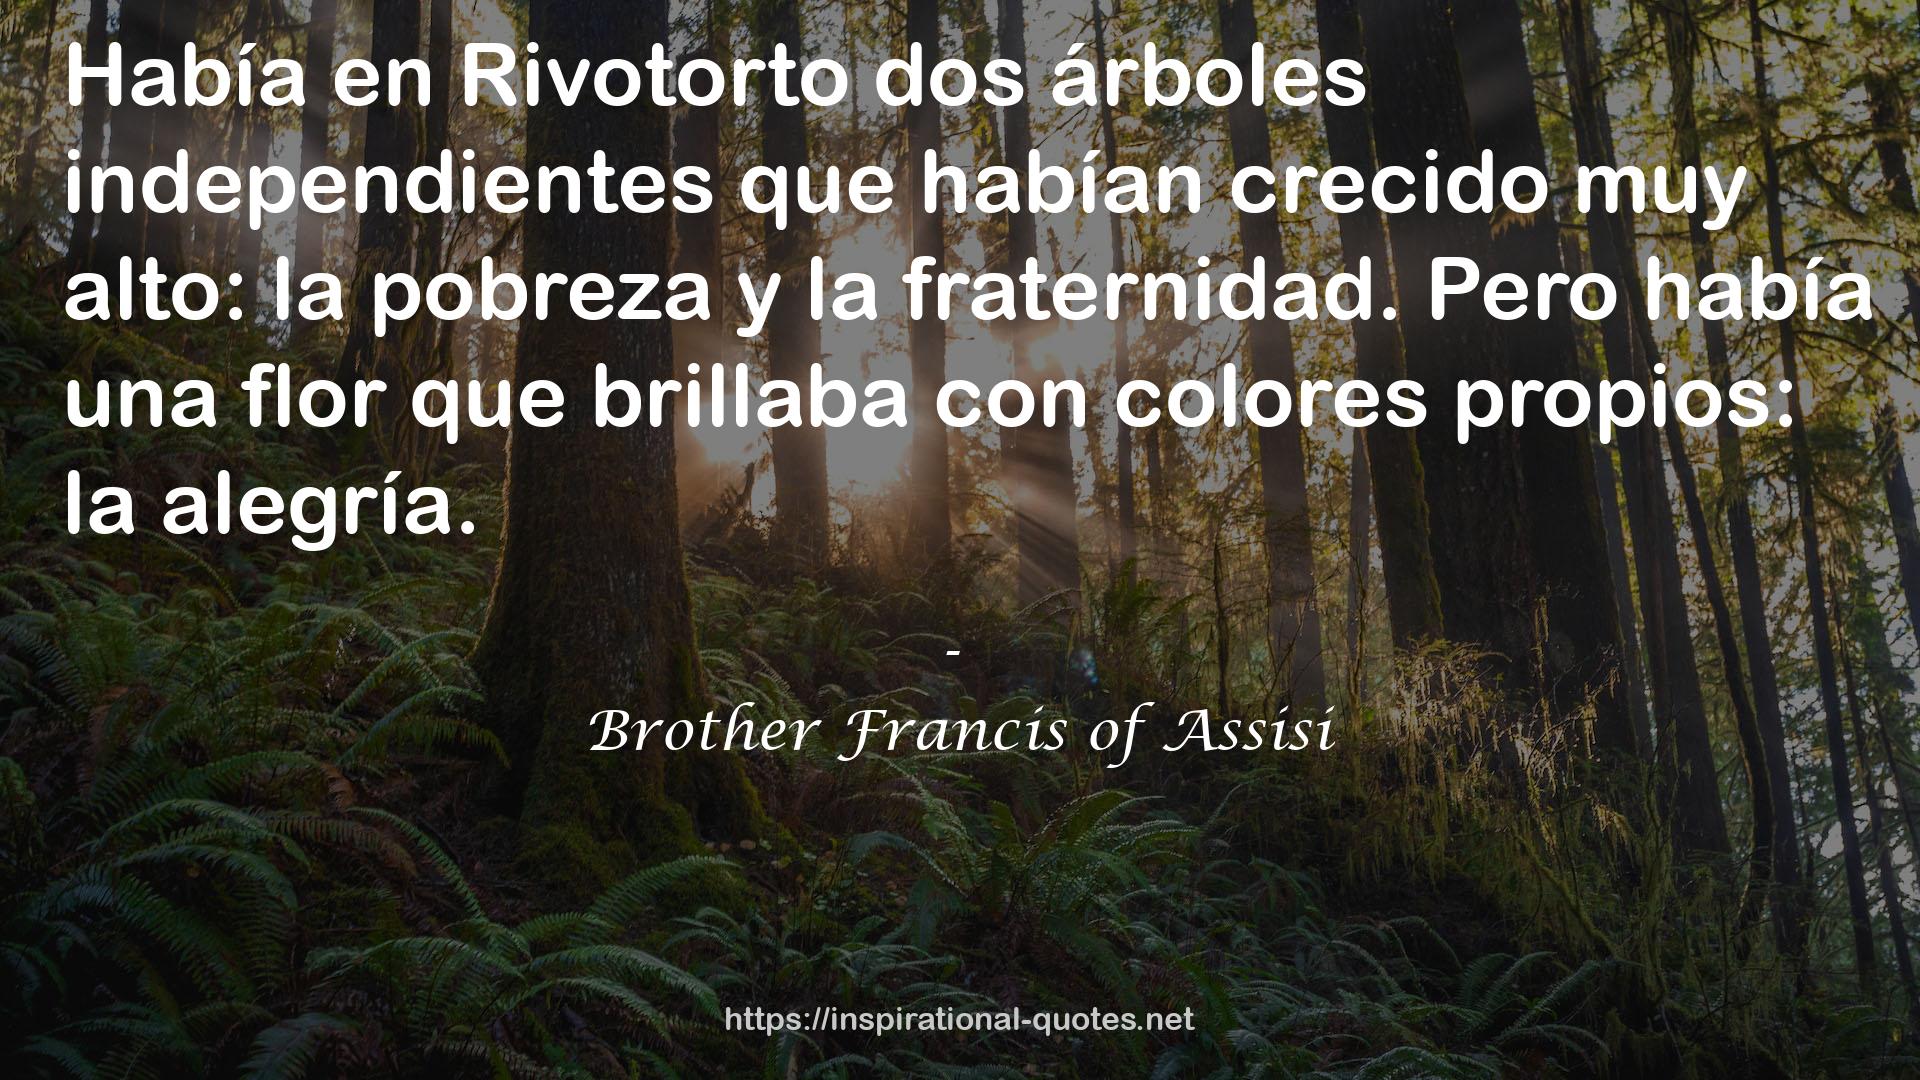 Brother Francis of Assisi QUOTES